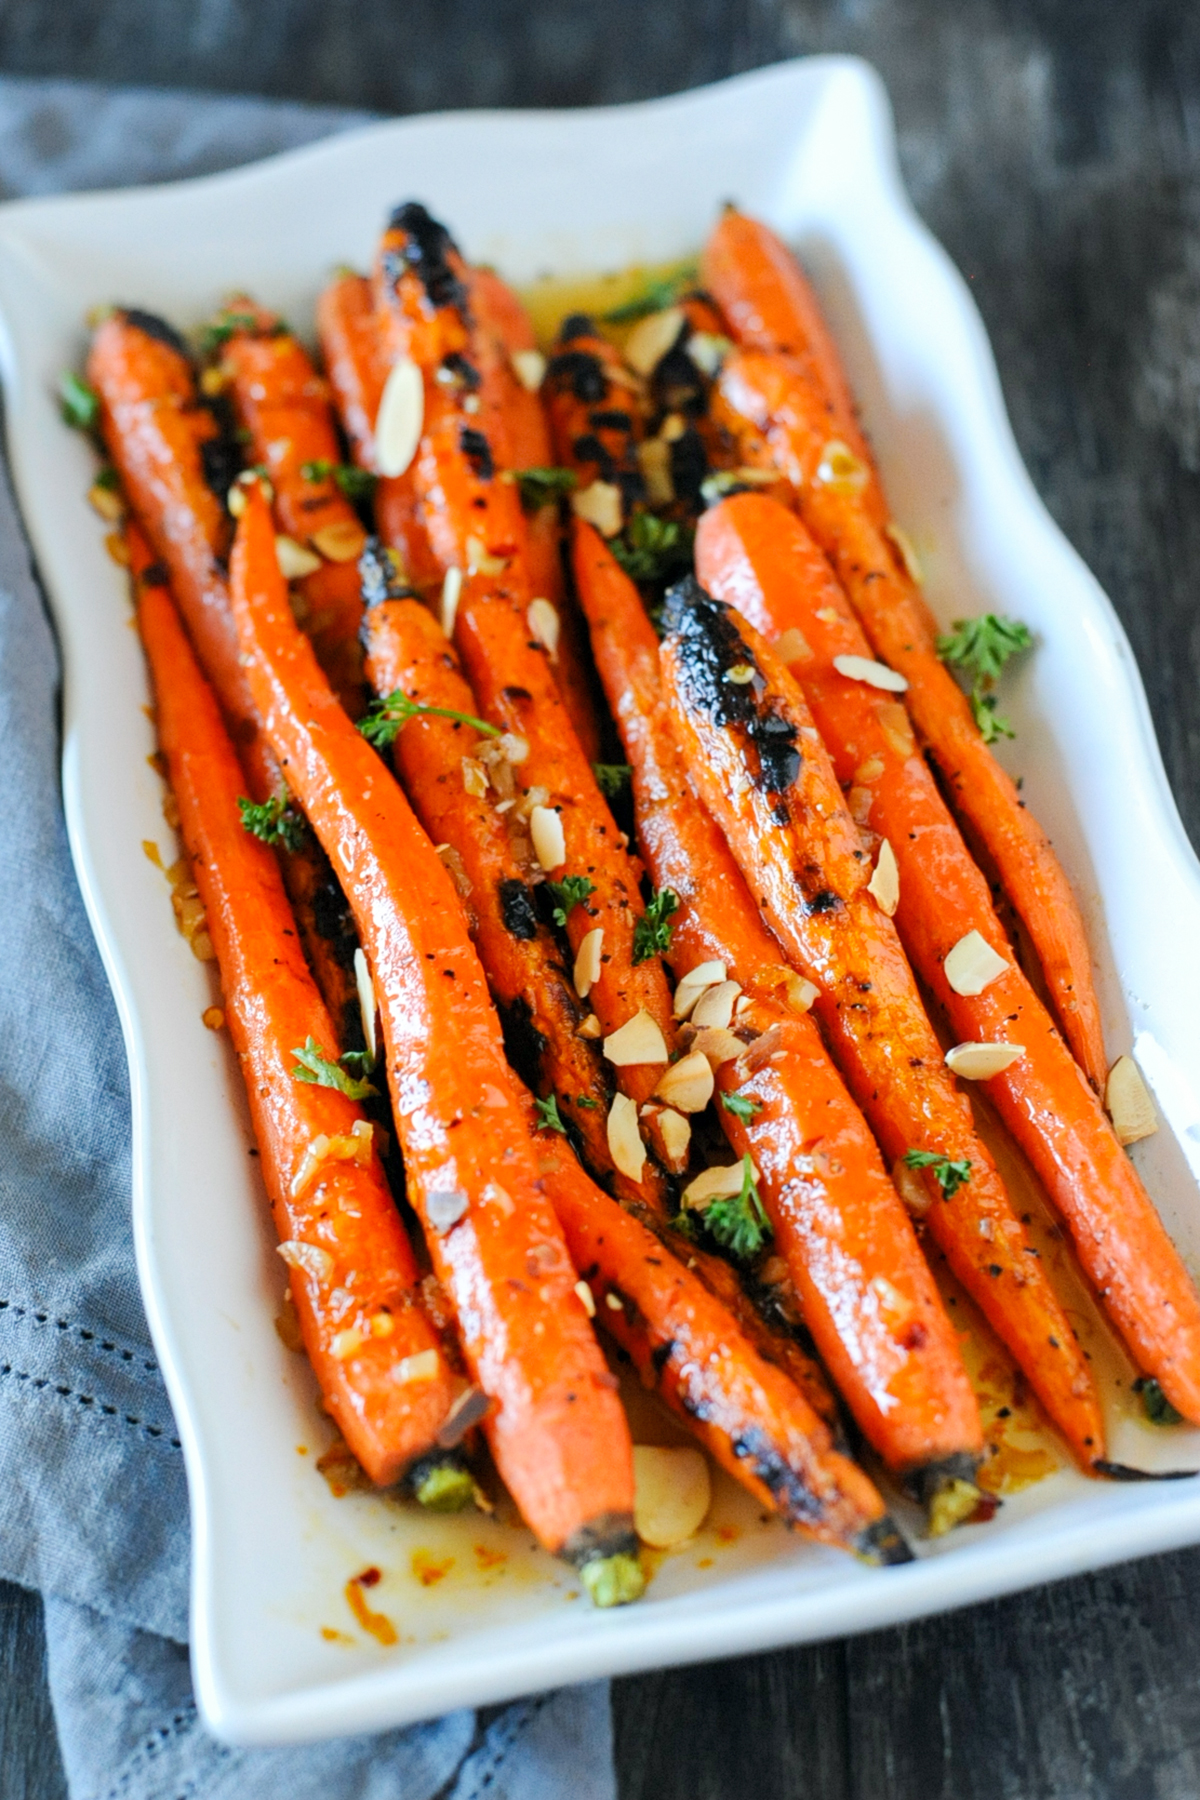 Grilled maple glazed carrots on a plate.